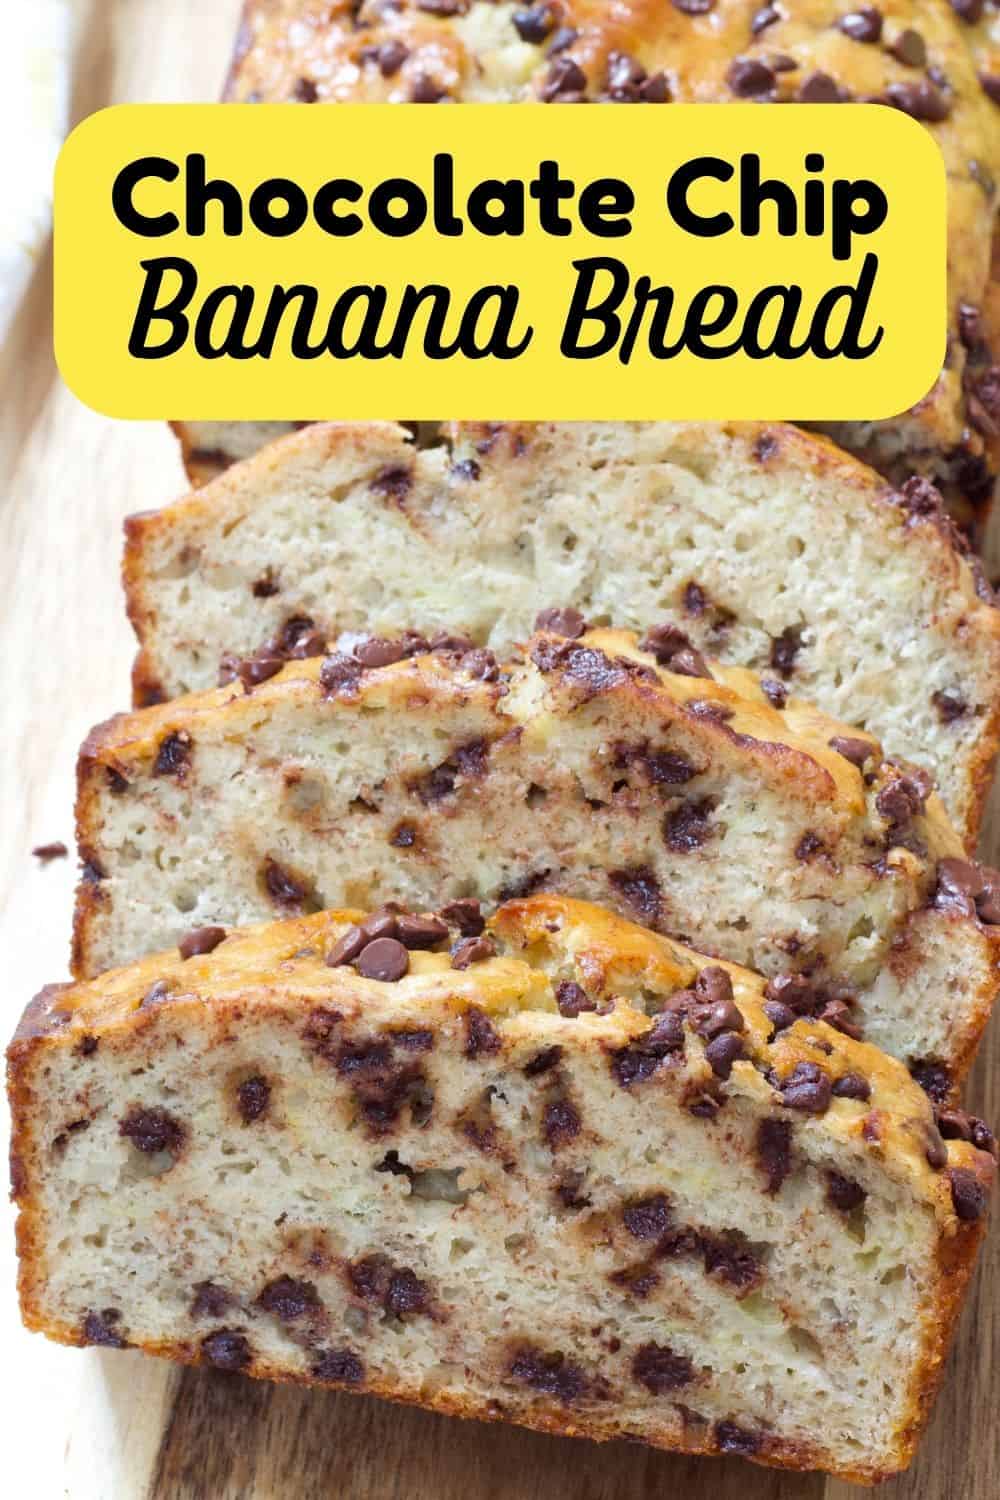 Chocolate Chip Banana Bread Recipe is moist and tender with melty mini chocolate chips. Perfect for breakfast or a snack. via @mindyscookingobsession